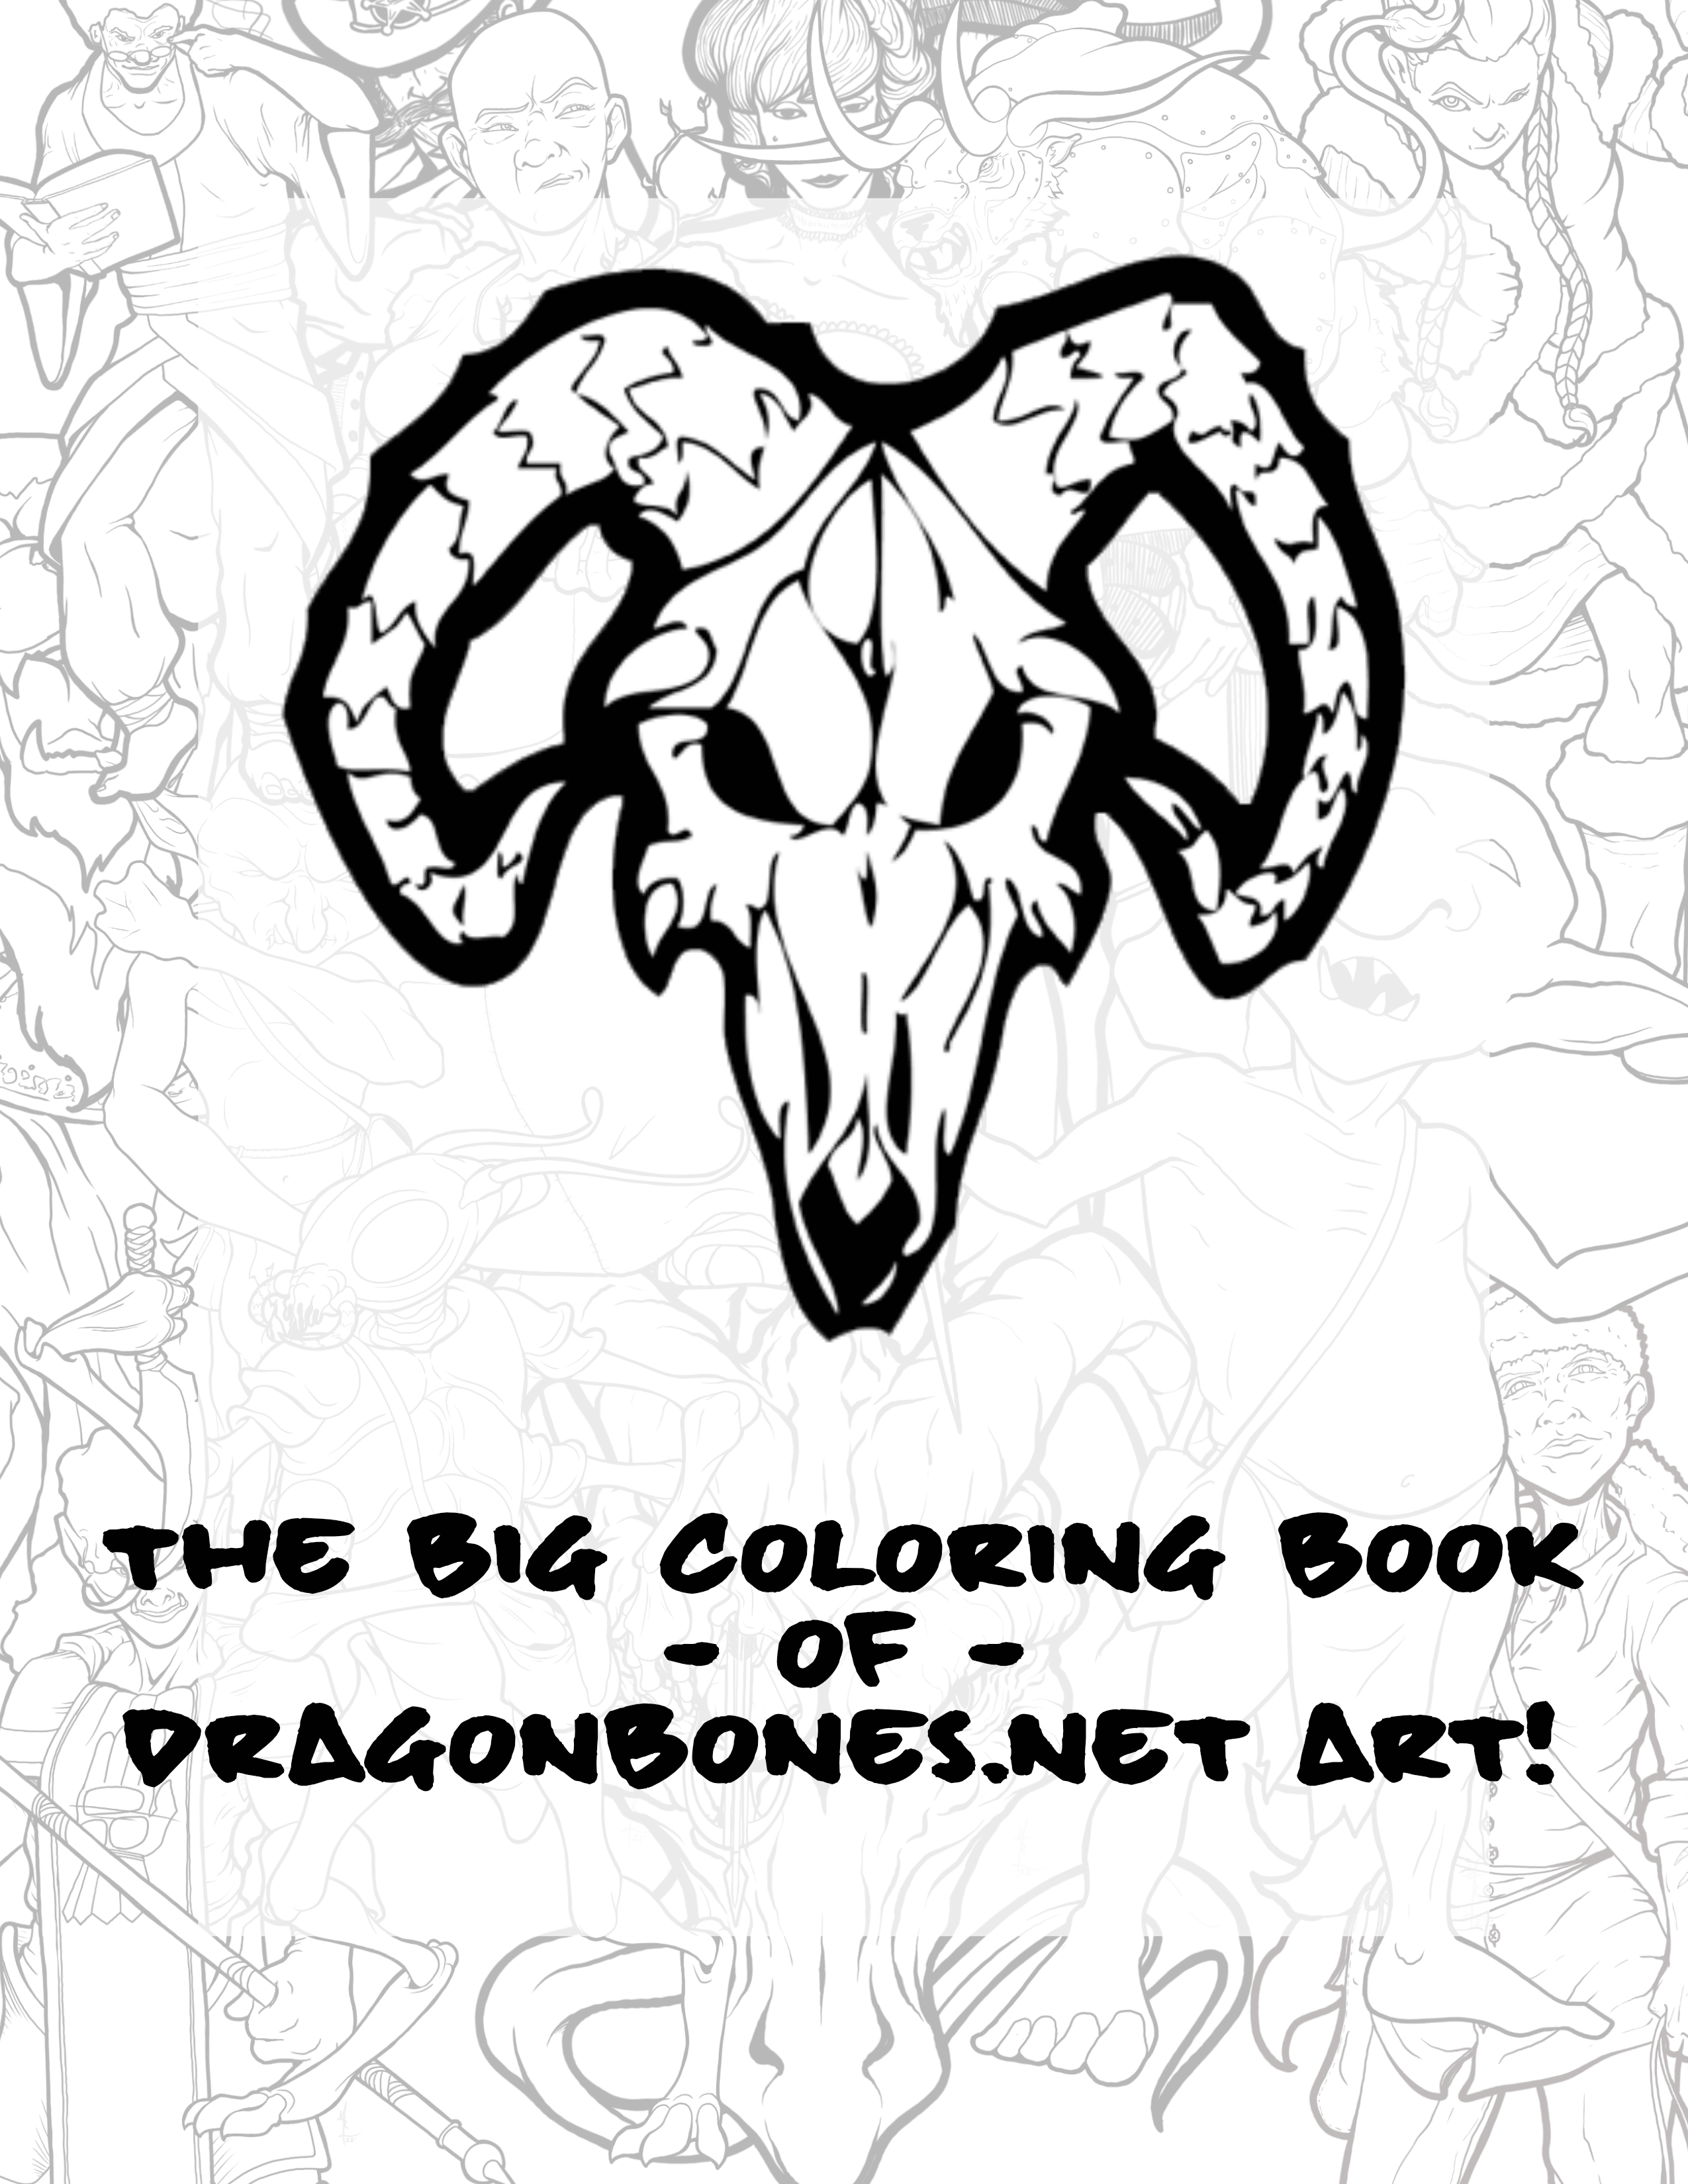 The front cover from the new / bigger Dragonbones.Net Coloring Book - now available on GumRoad